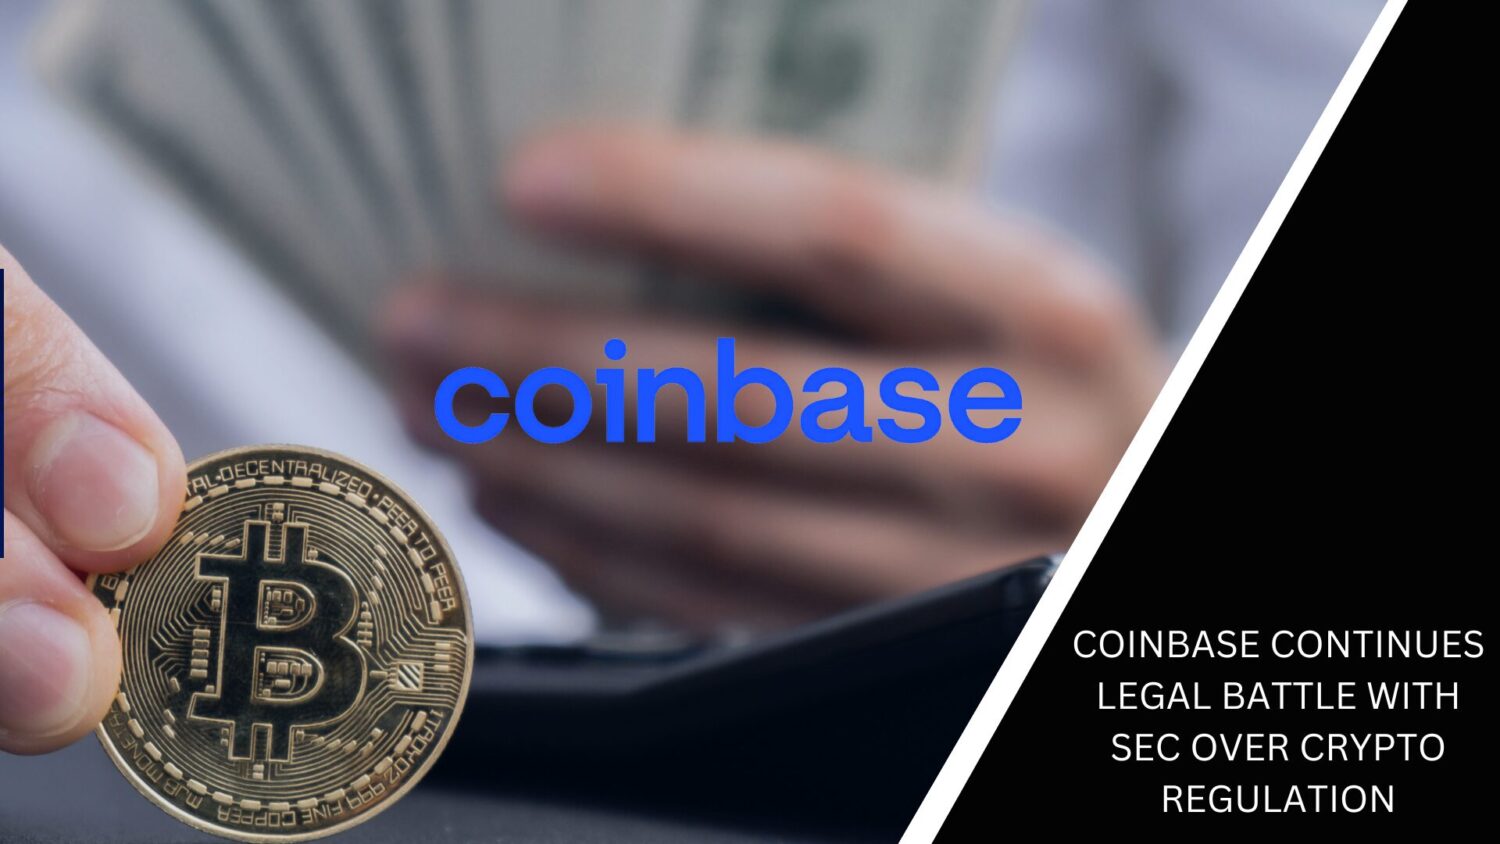 Coinbase Continues Legal Battle With Sec Over Crypto Regulation